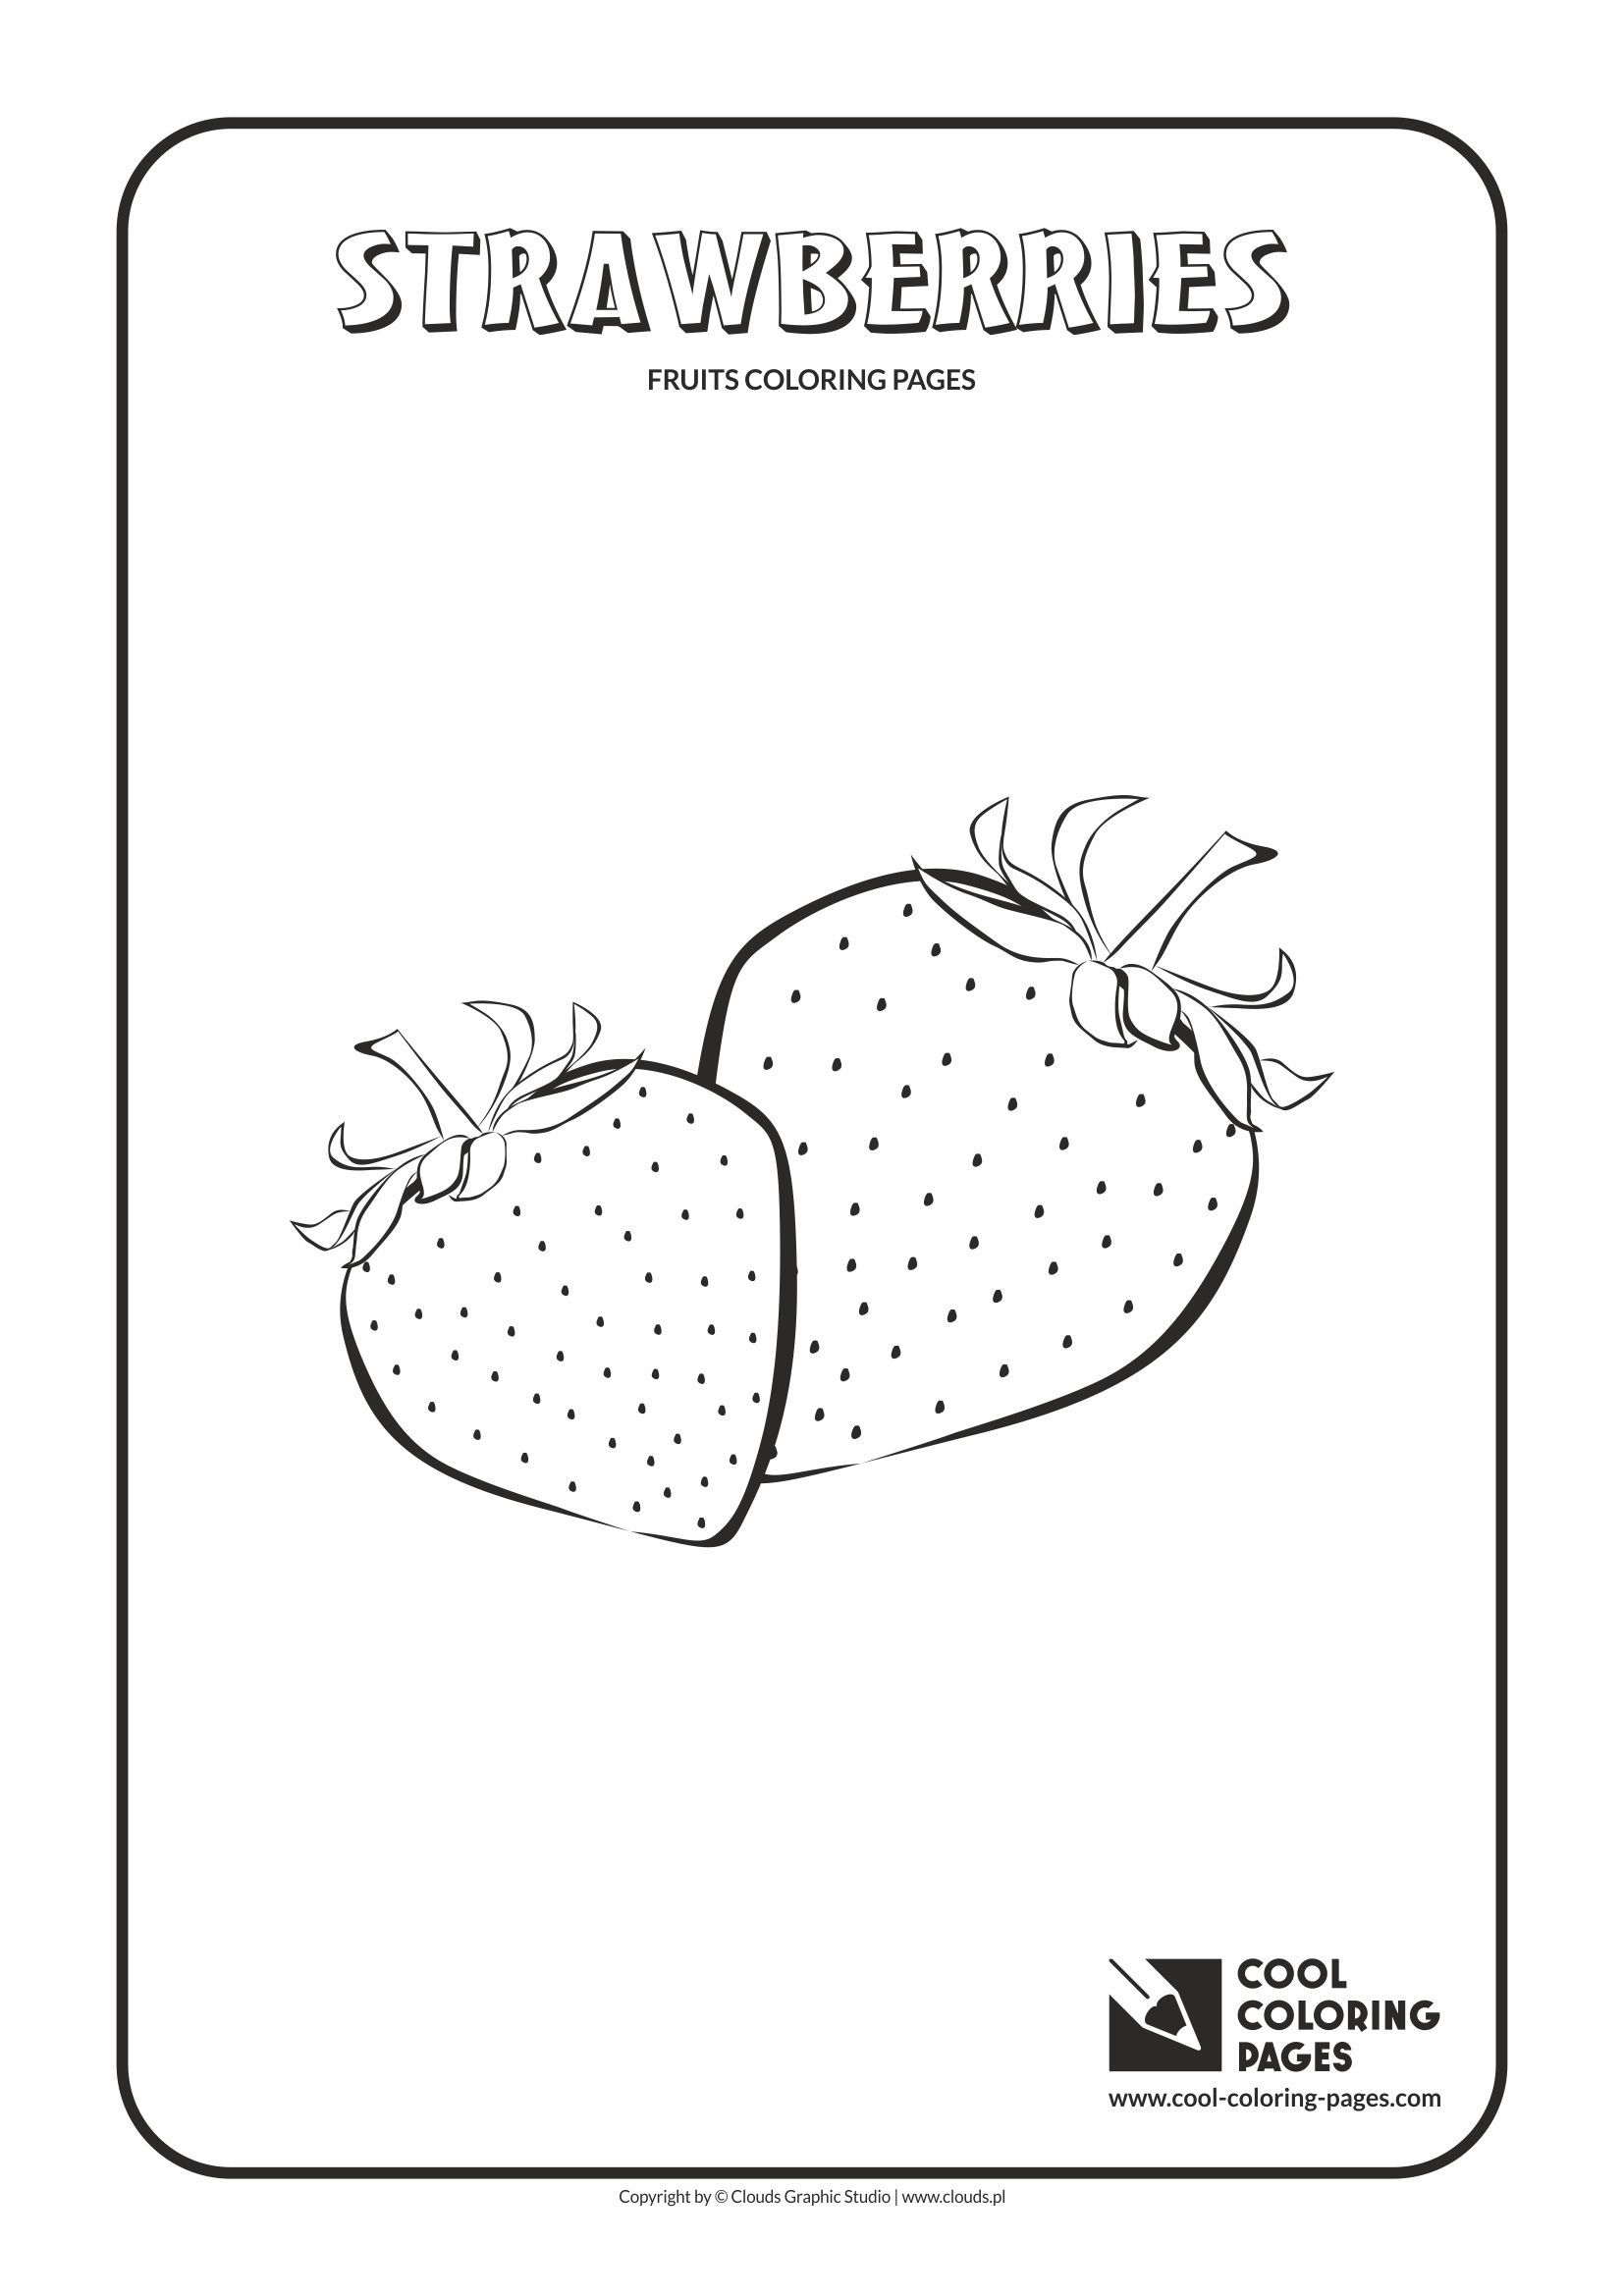 Cool Coloring Pages - Plants / Strawberries / Coloring page with strawberries